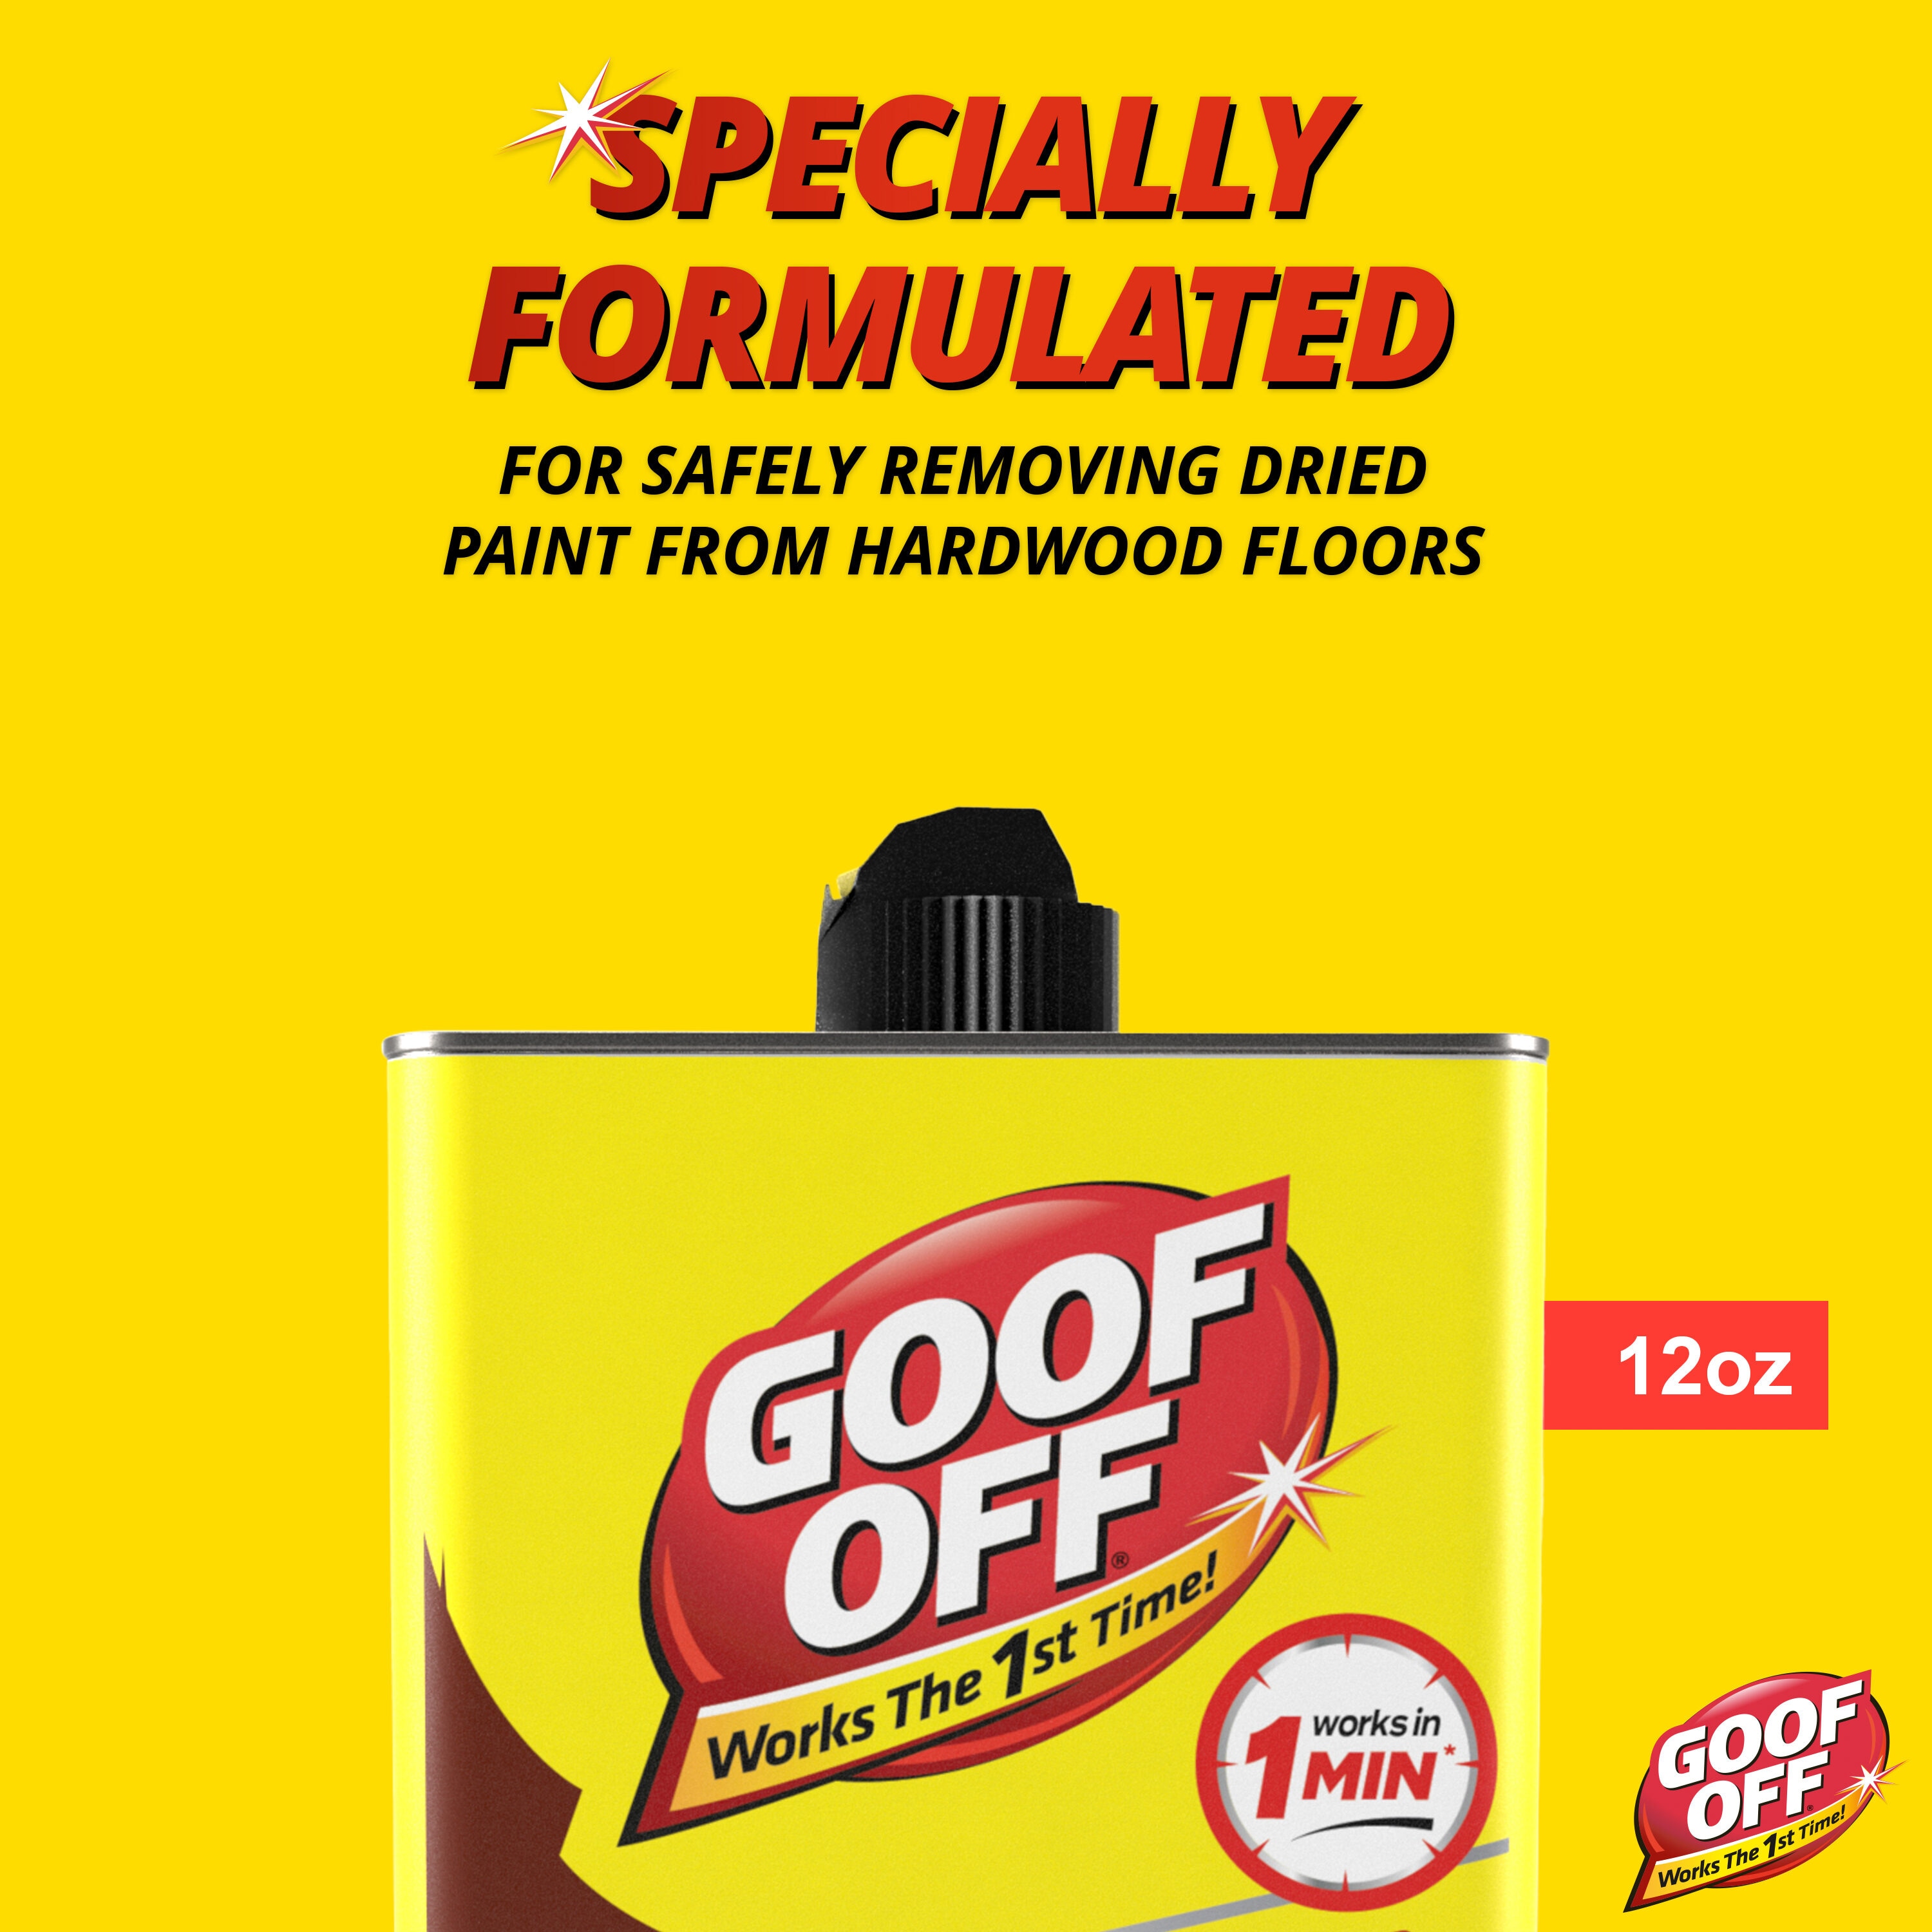 Goof off pro strength remover overspray removal 